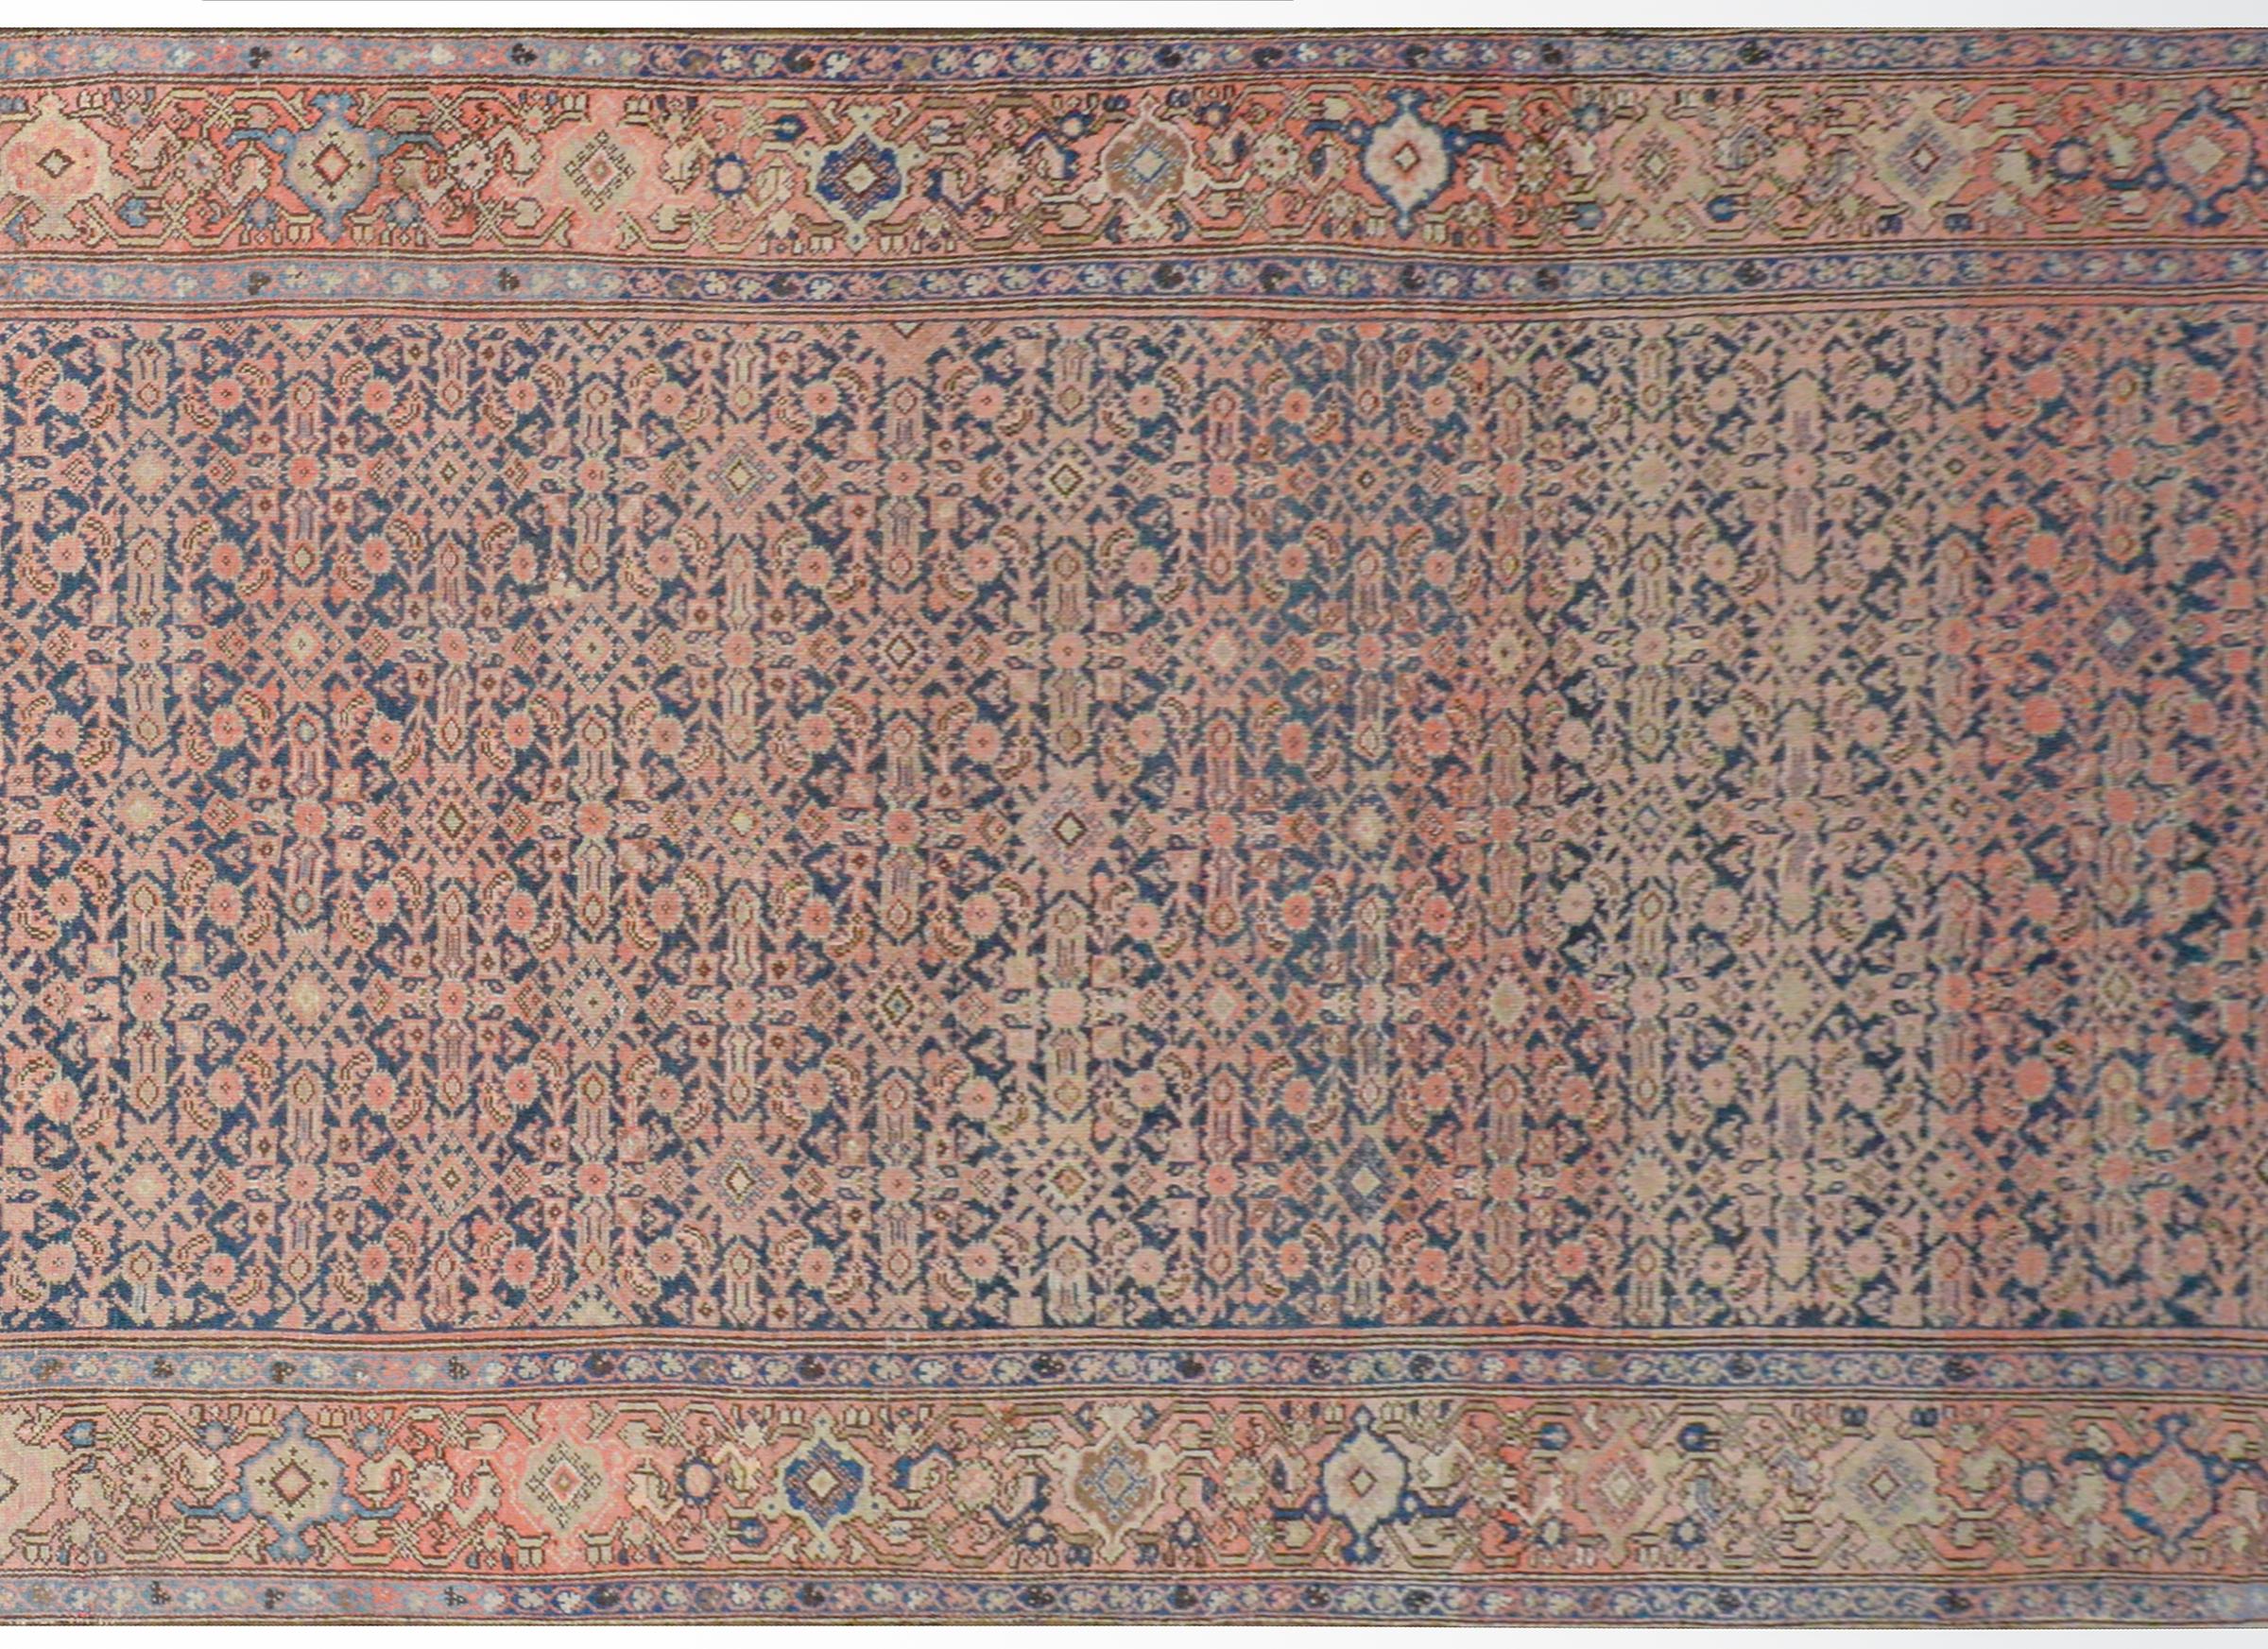 A gorgeous early 20th century Persian Herati rug with a wonderful all-over trellis floral pattern woven in pink, light indigo, and gold, on a dark indigo background surrounded by a wide border with a large-scale floral and scrolling vine pattern.